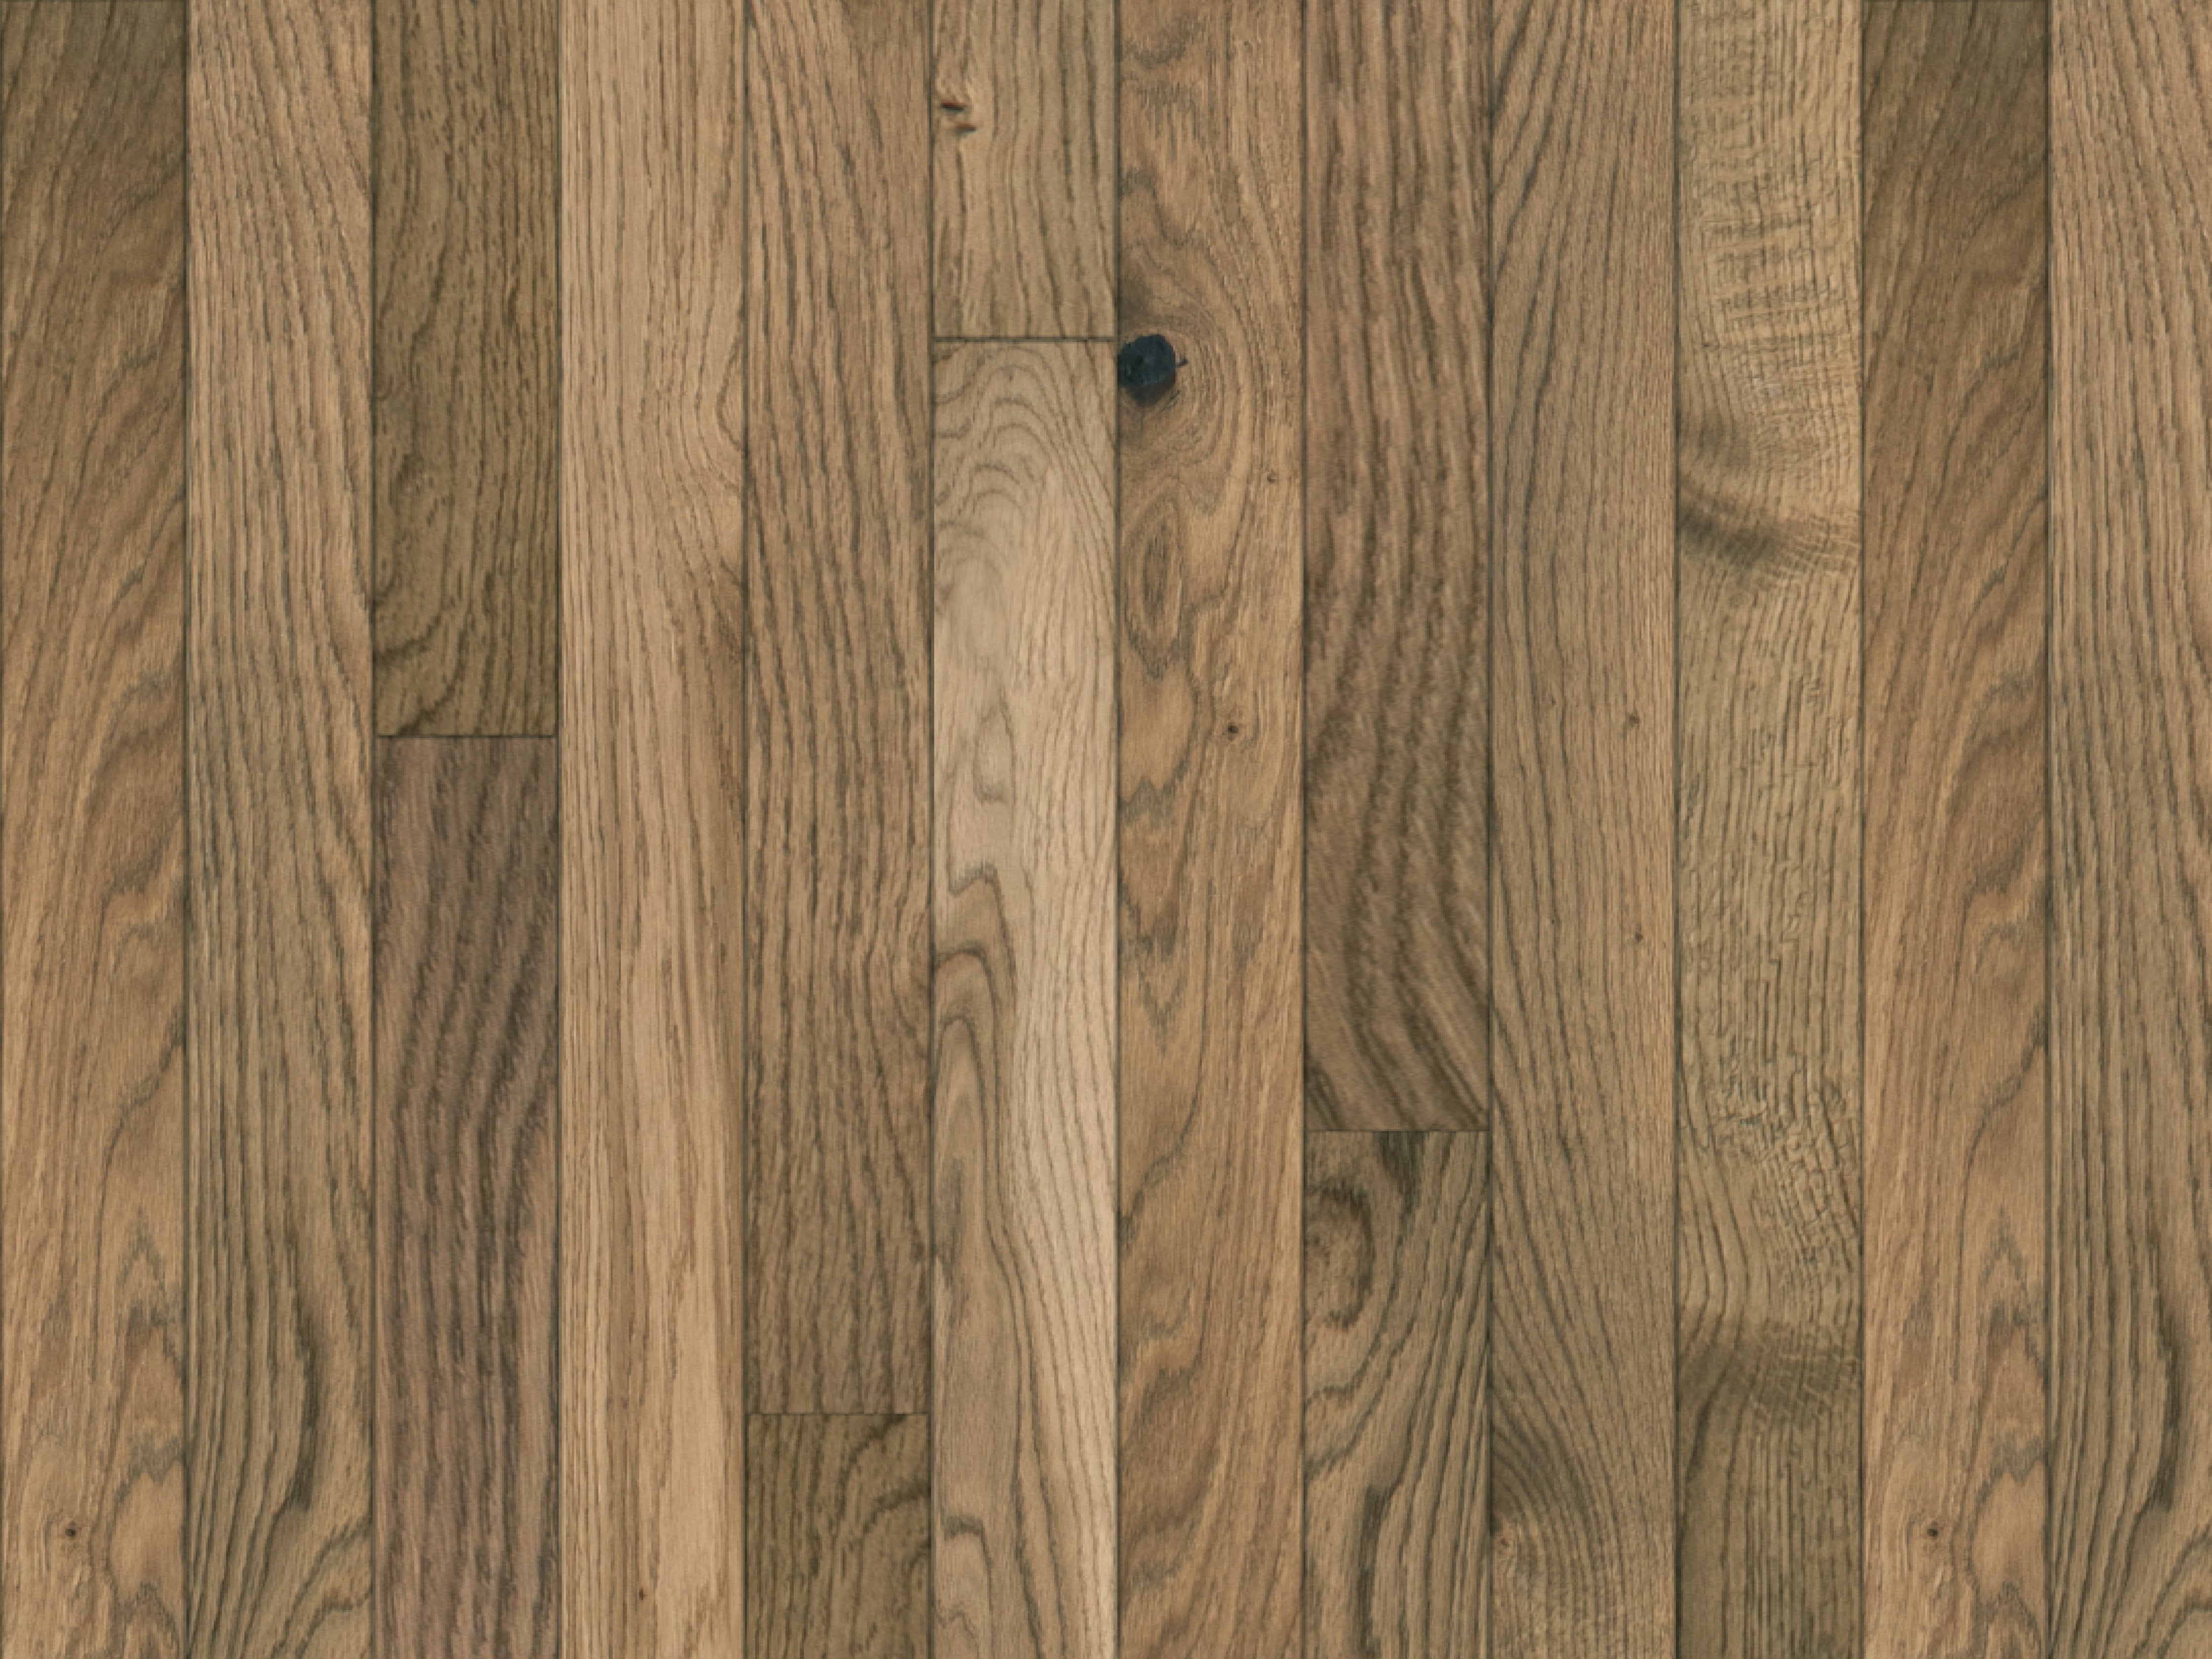 duchateau the guild makerlab edition planer european oak engineered hardnatural wood floor uv lacquer finish for interior use distributed by surface group international